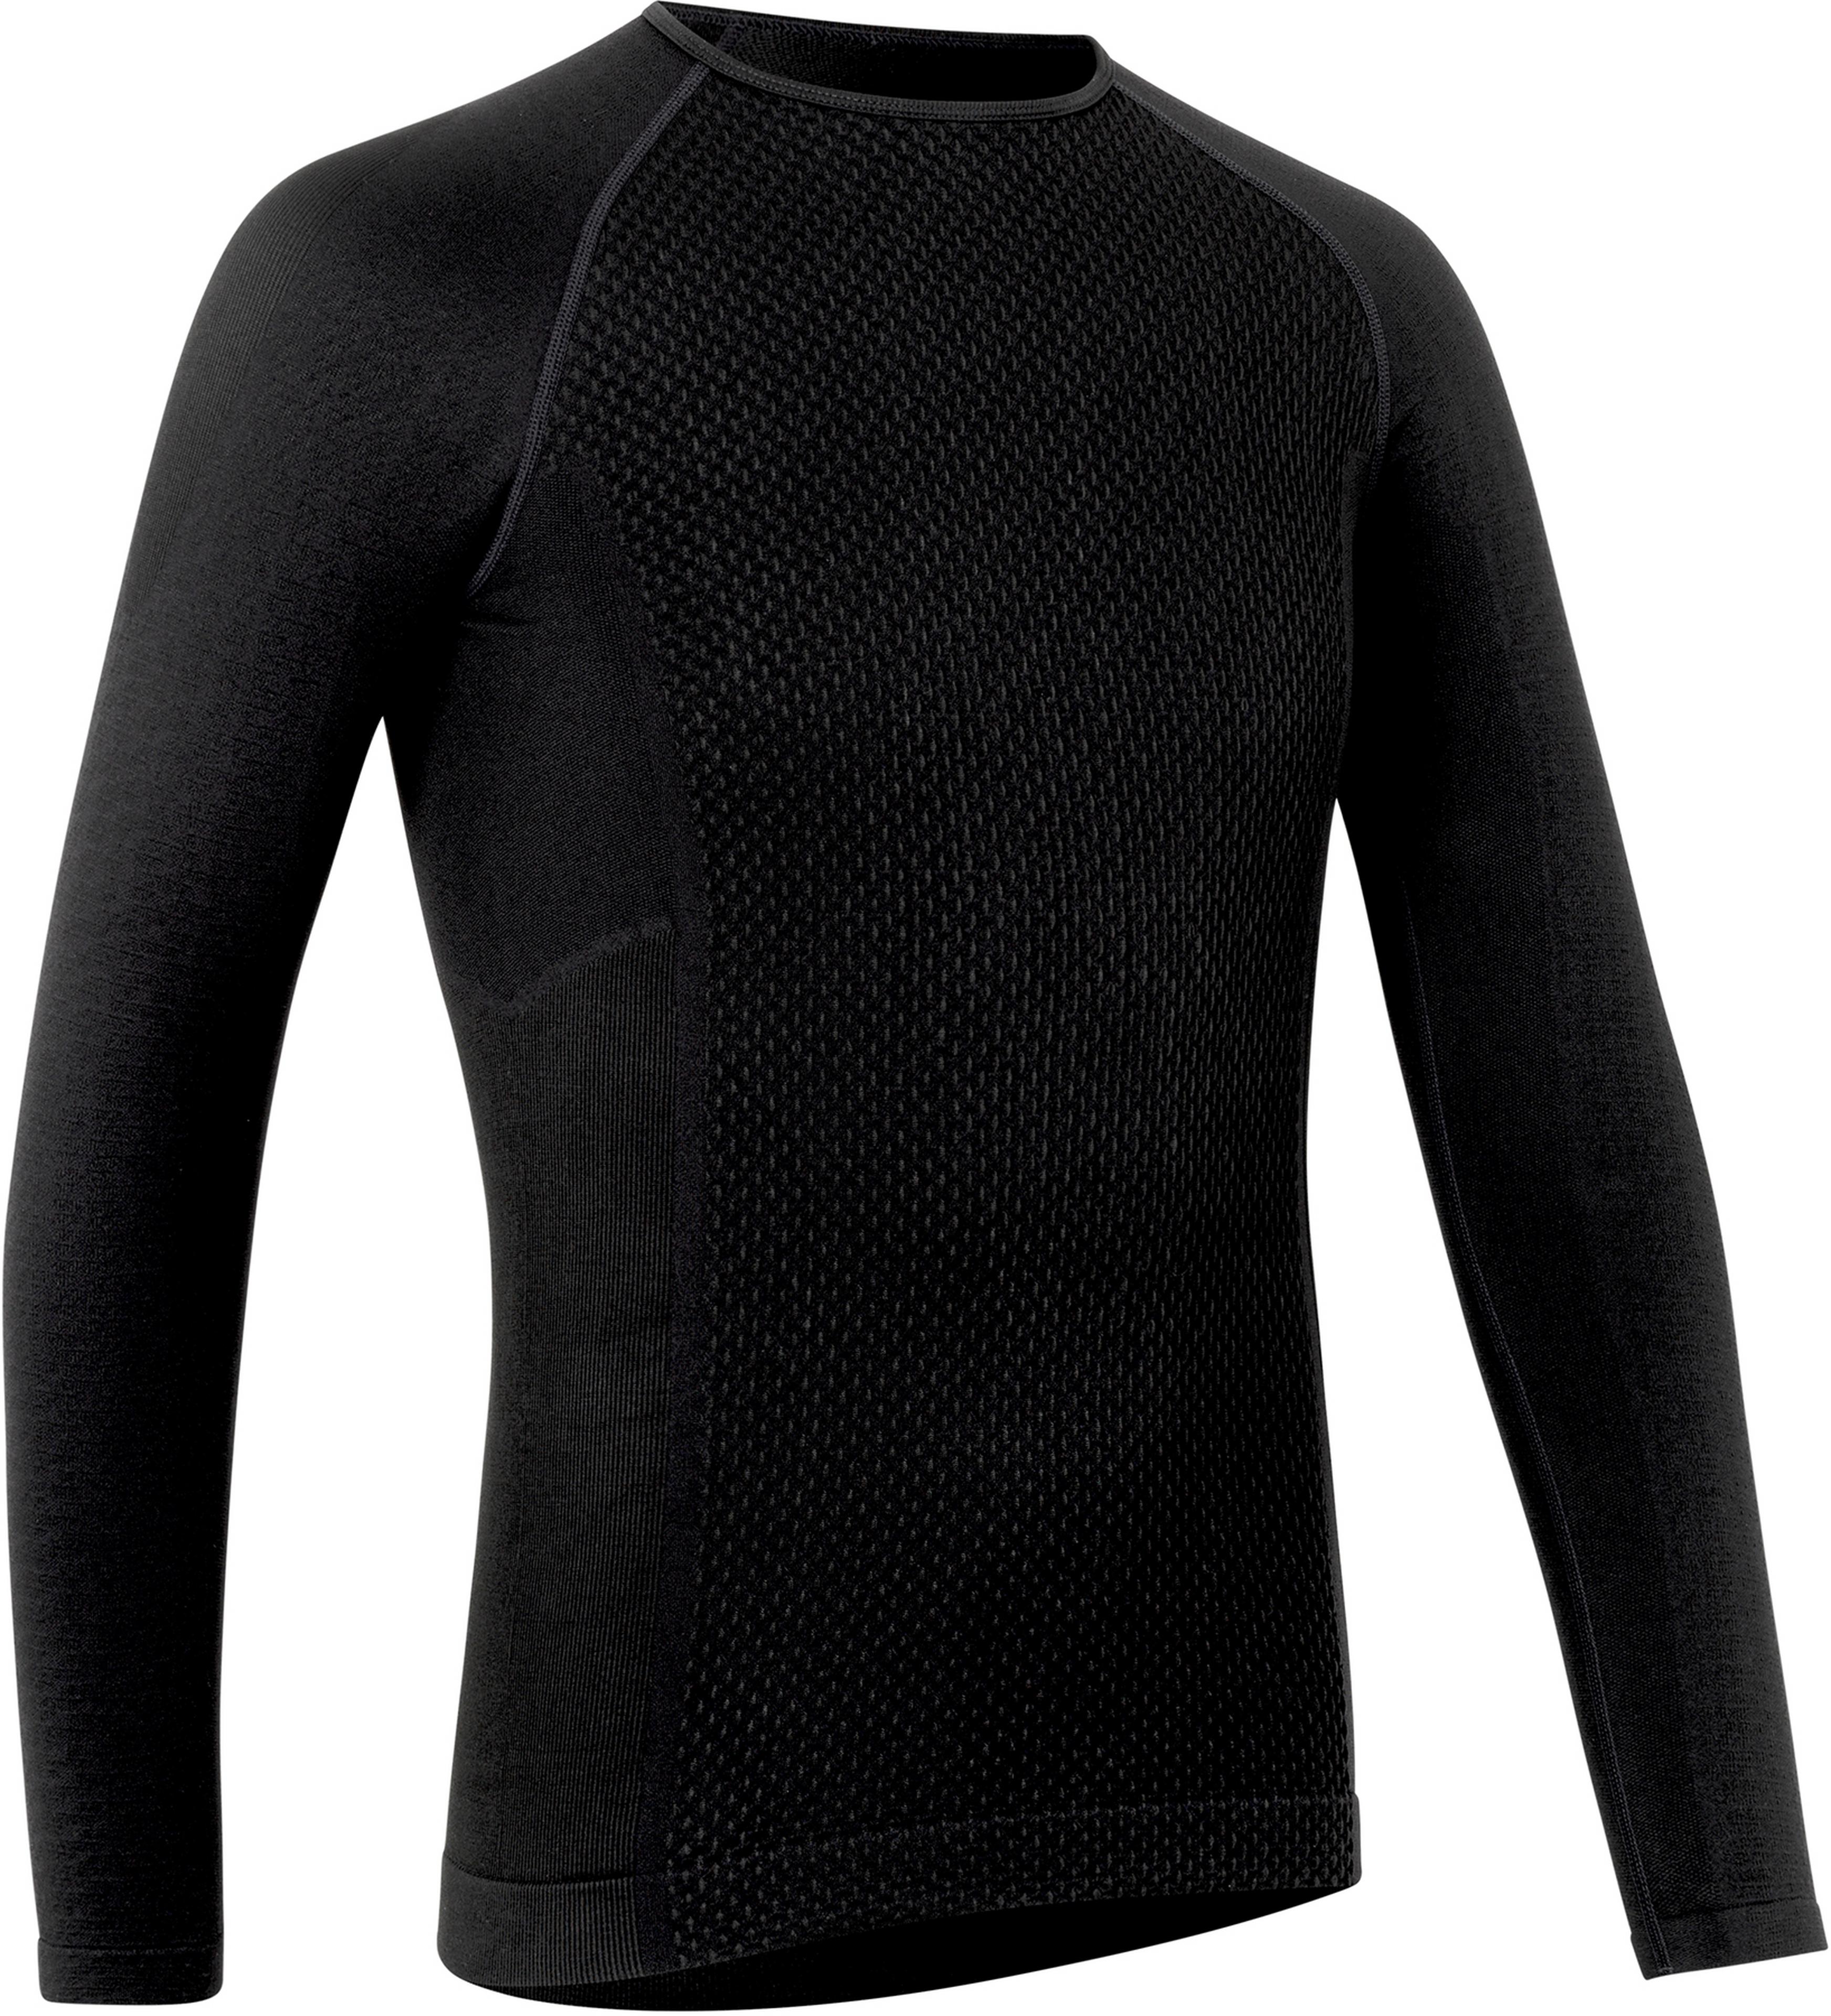 GripGrab Expert Seamless Long Sleeve Thermal Base Layer 2